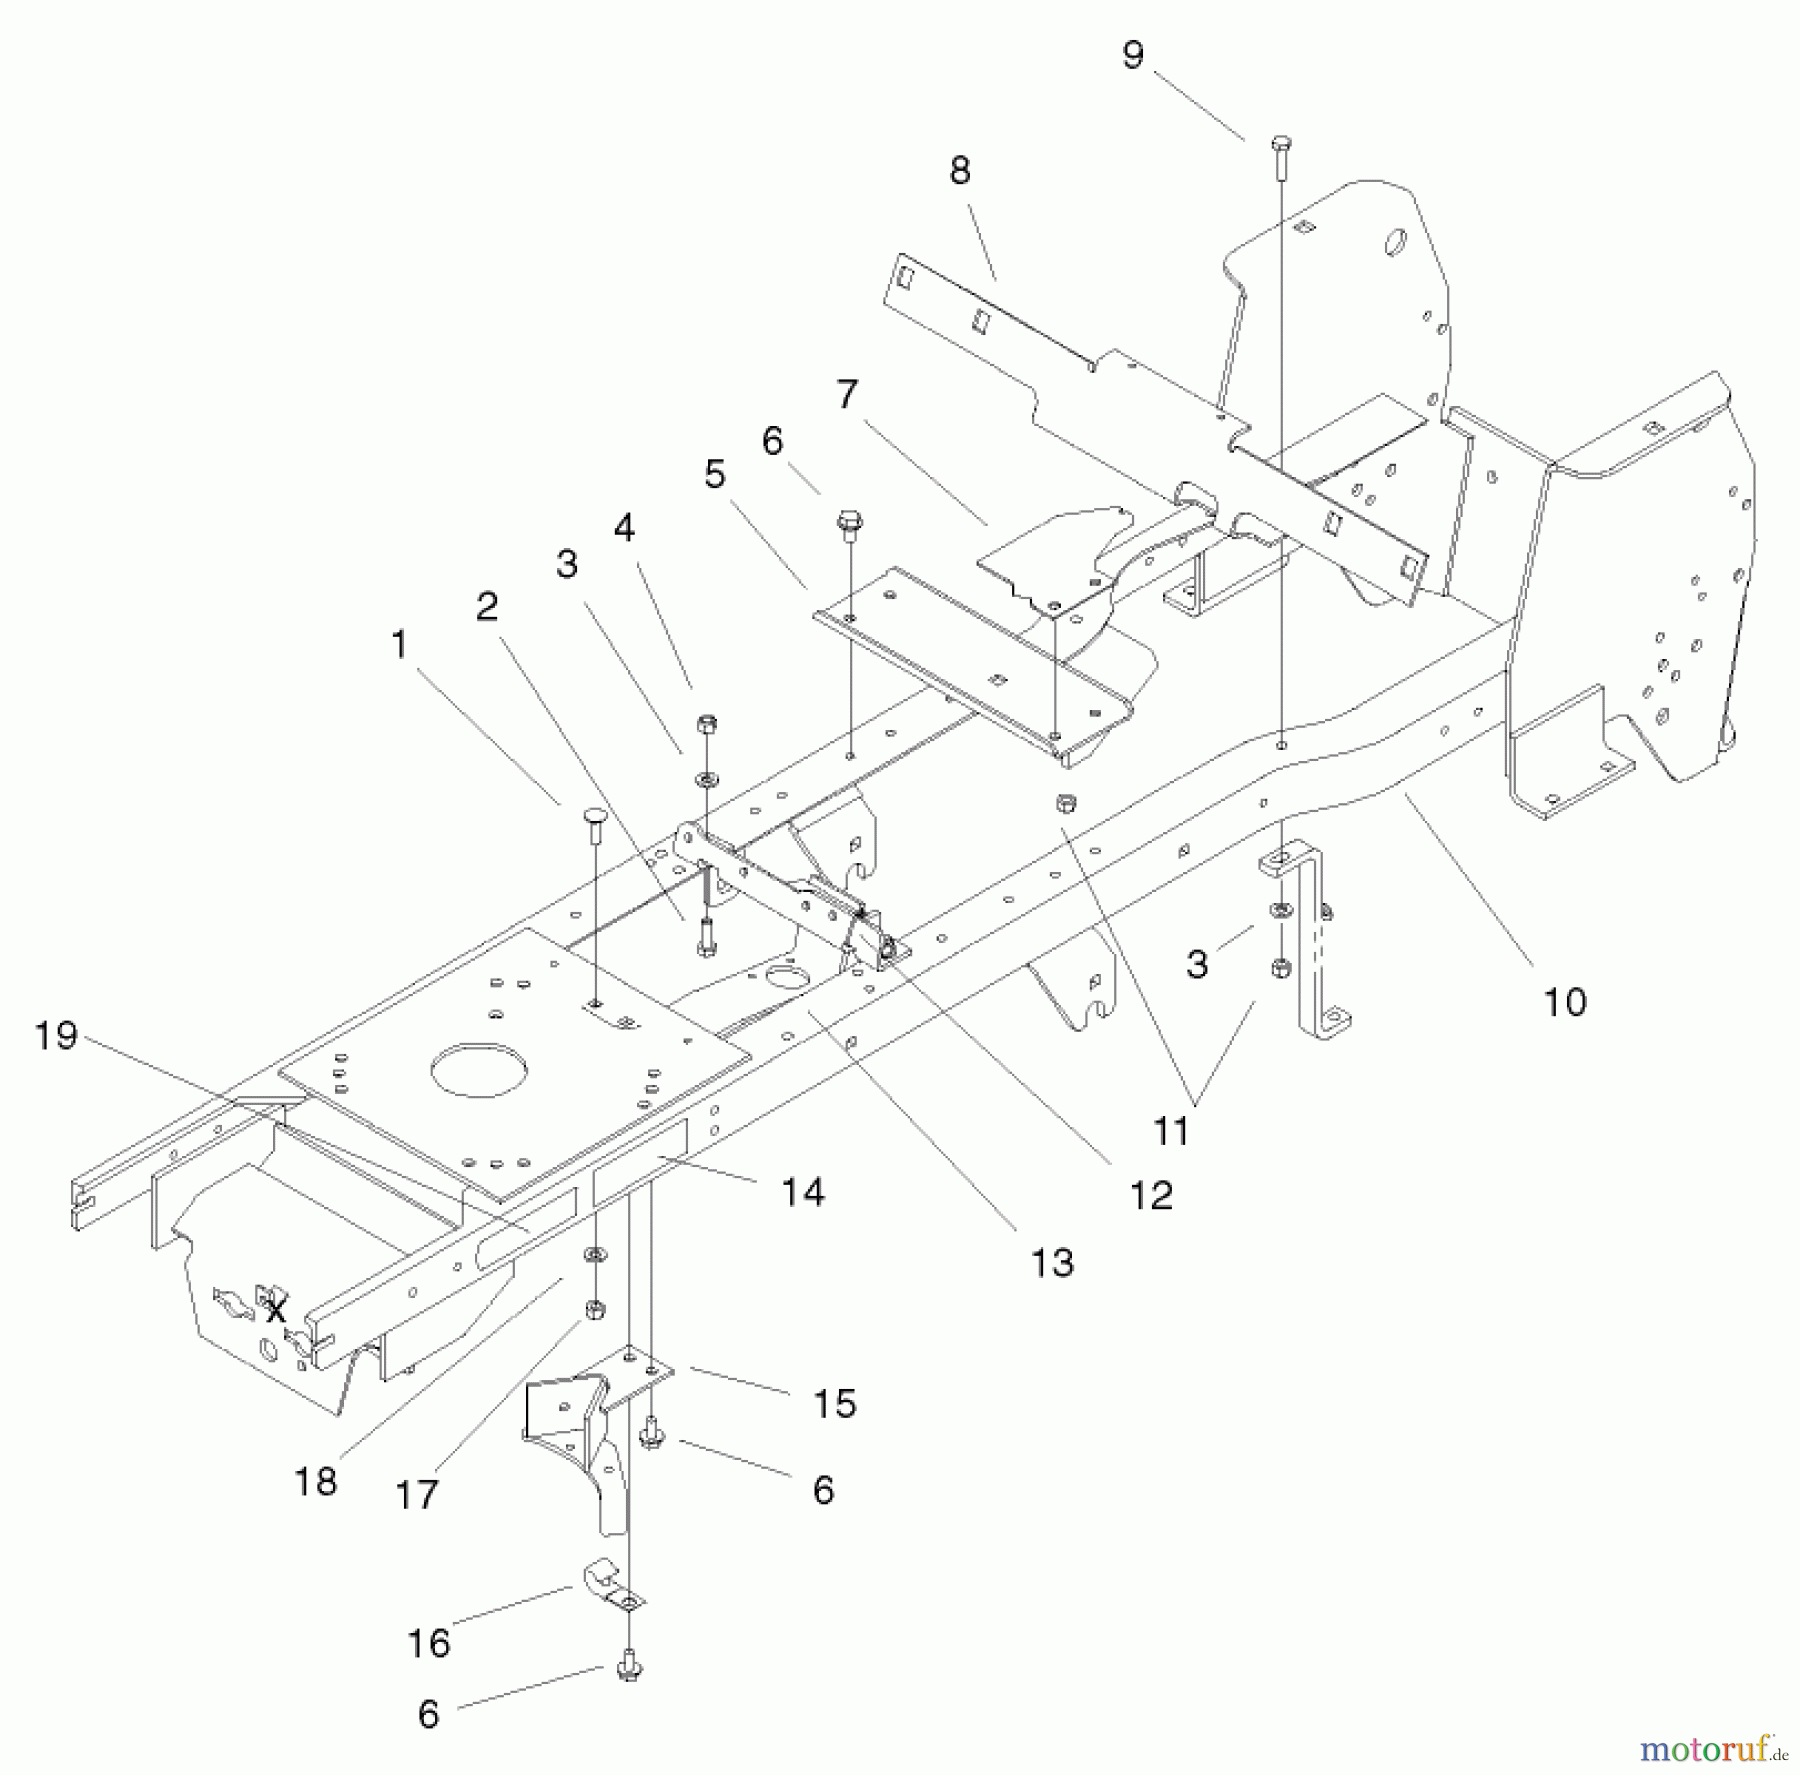  Toro Neu Mowers, Lawn & Garden Tractor Seite 1 72050 (265-H) - Toro 265-H Lawn and Garden Tractor, 2000 (200000001-200999999) FRAME ASSEMBLY